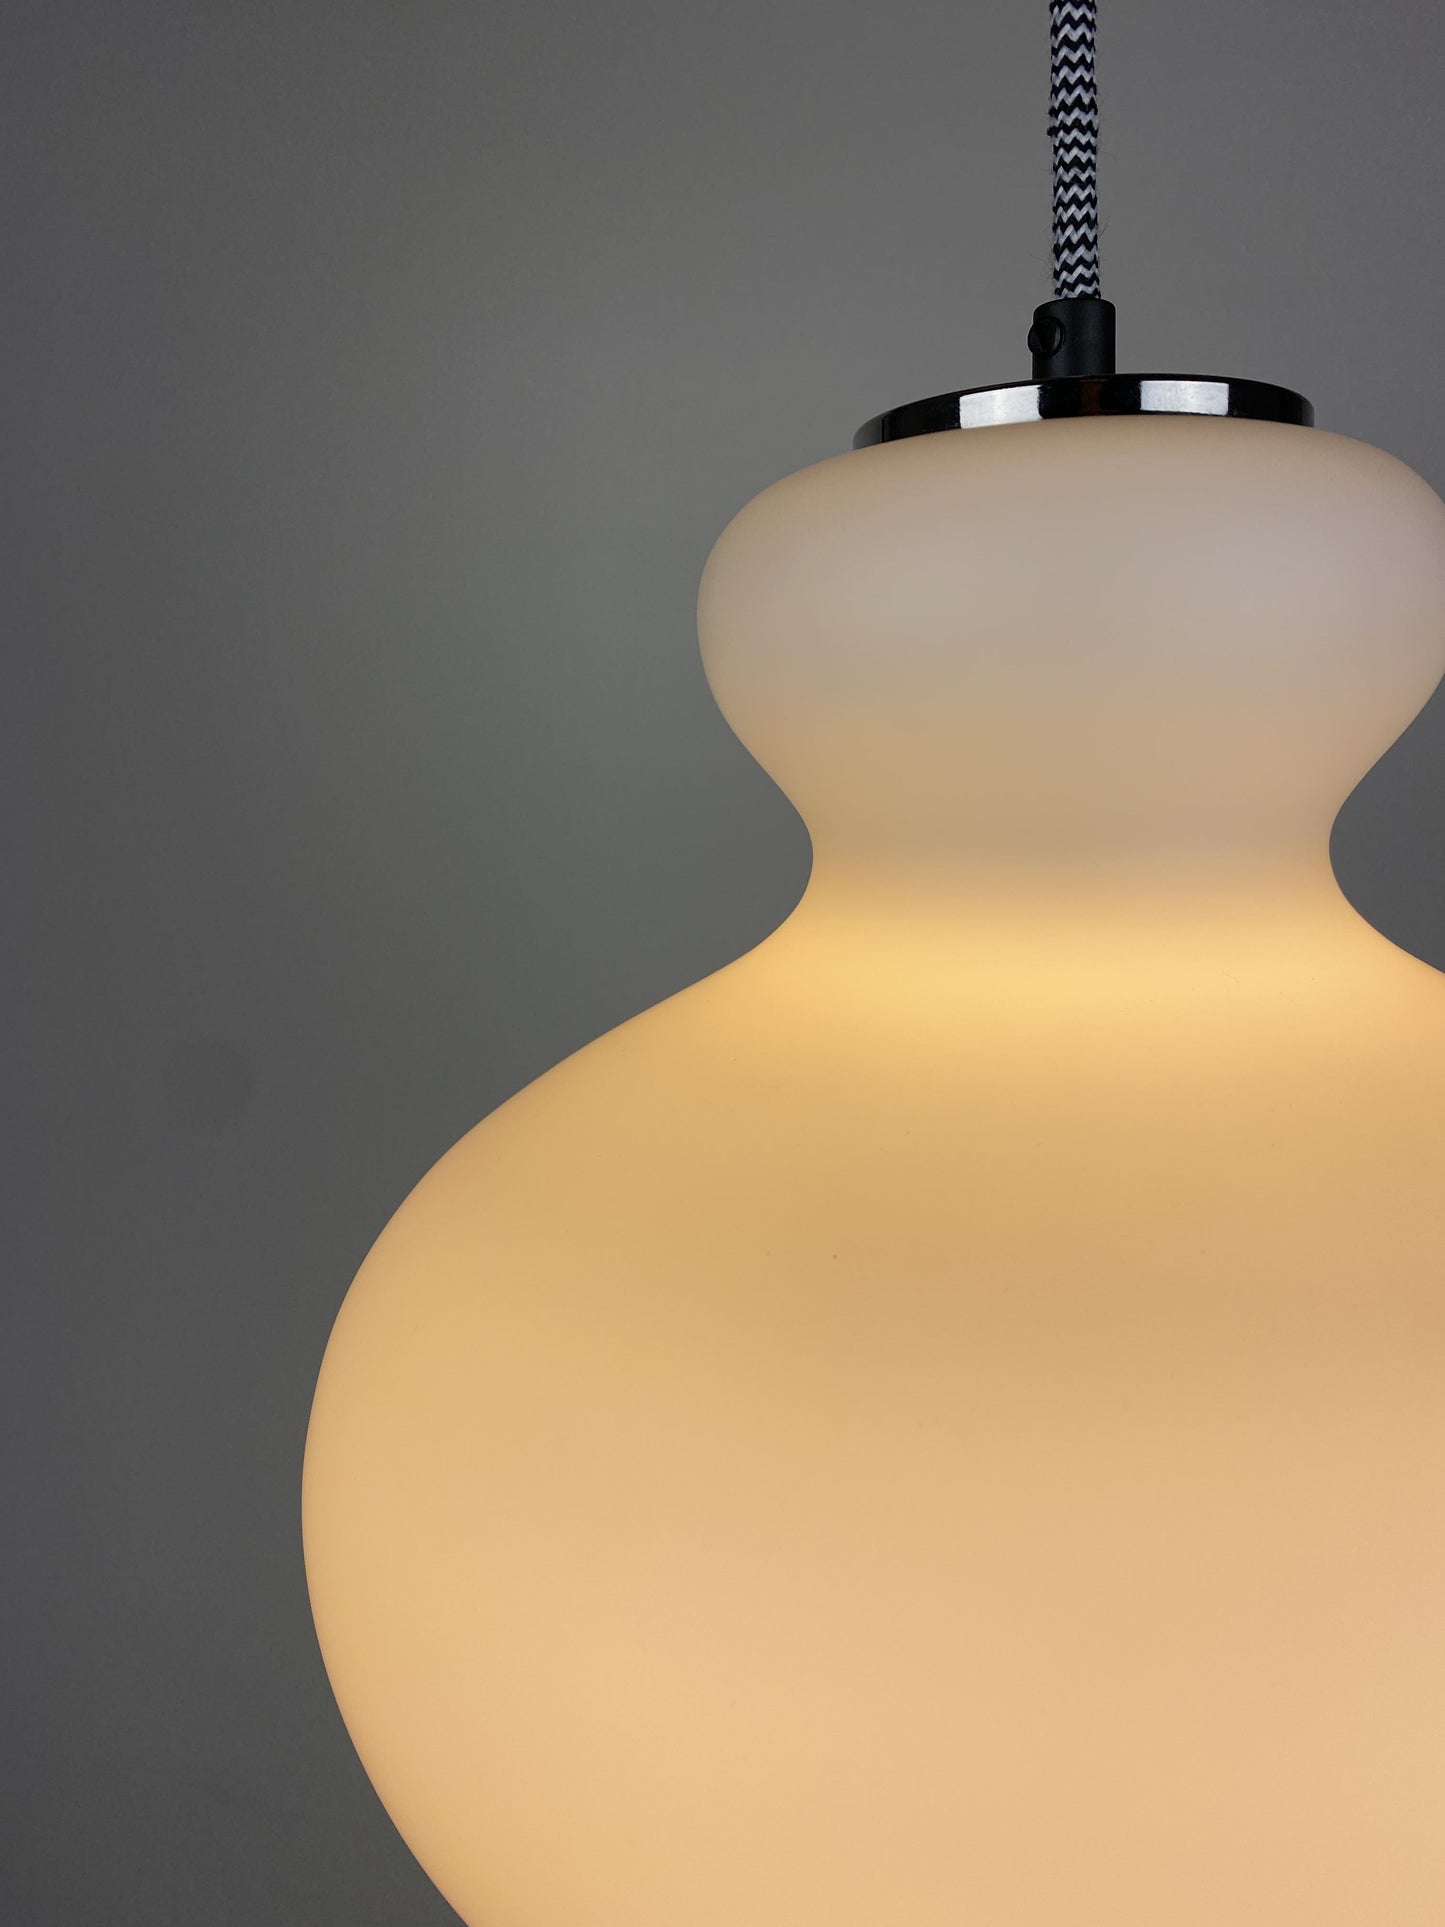 1 of 2 Frosted White glass pendant light by Peill and Putzler 1960